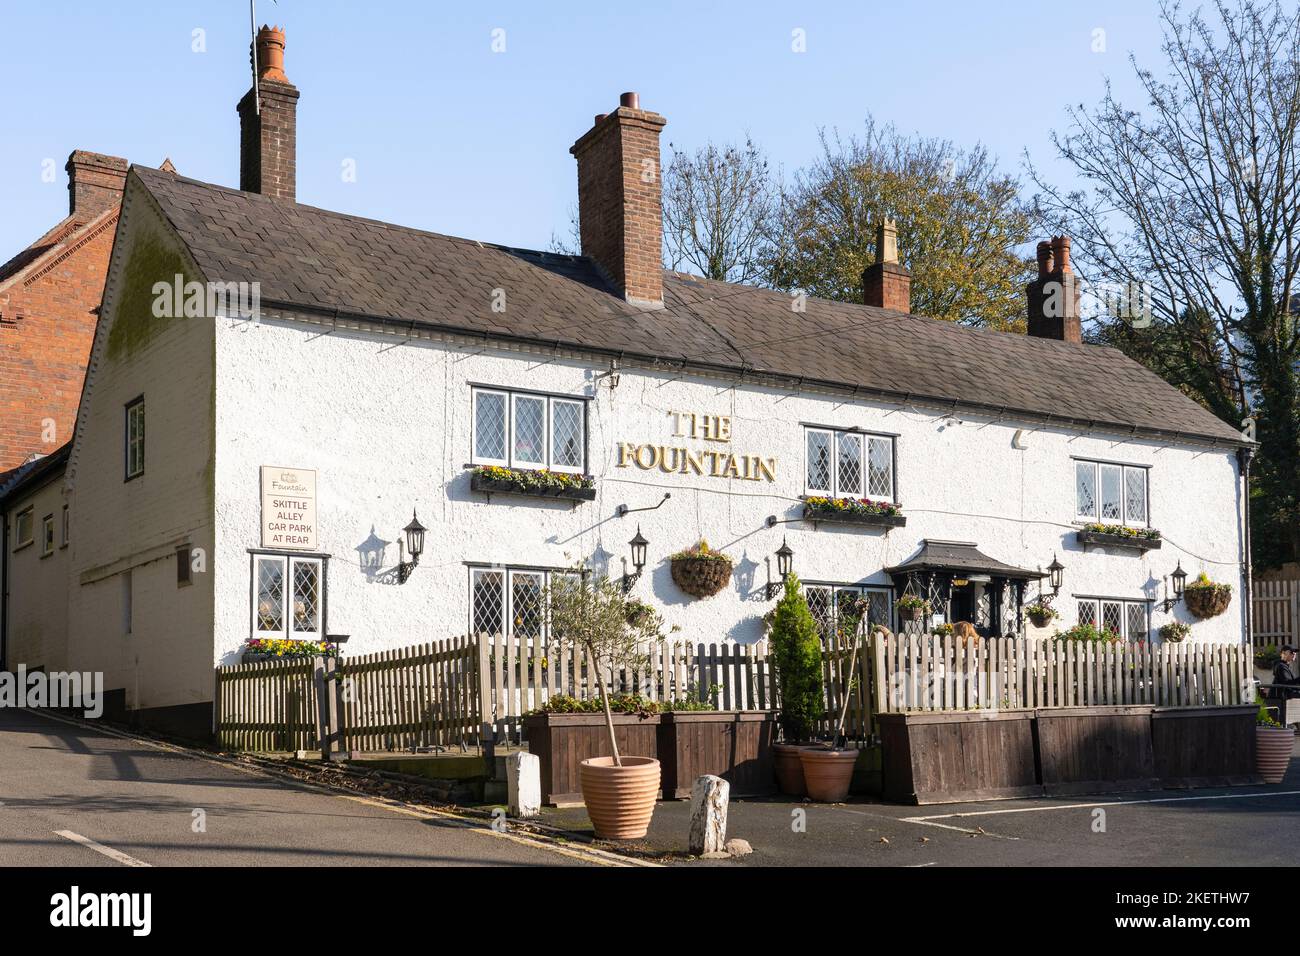 The Fountain at Clent - a traditional old-world oak beamed country pub situated in the charming Worcestershire village of Clent. England Stock Photo